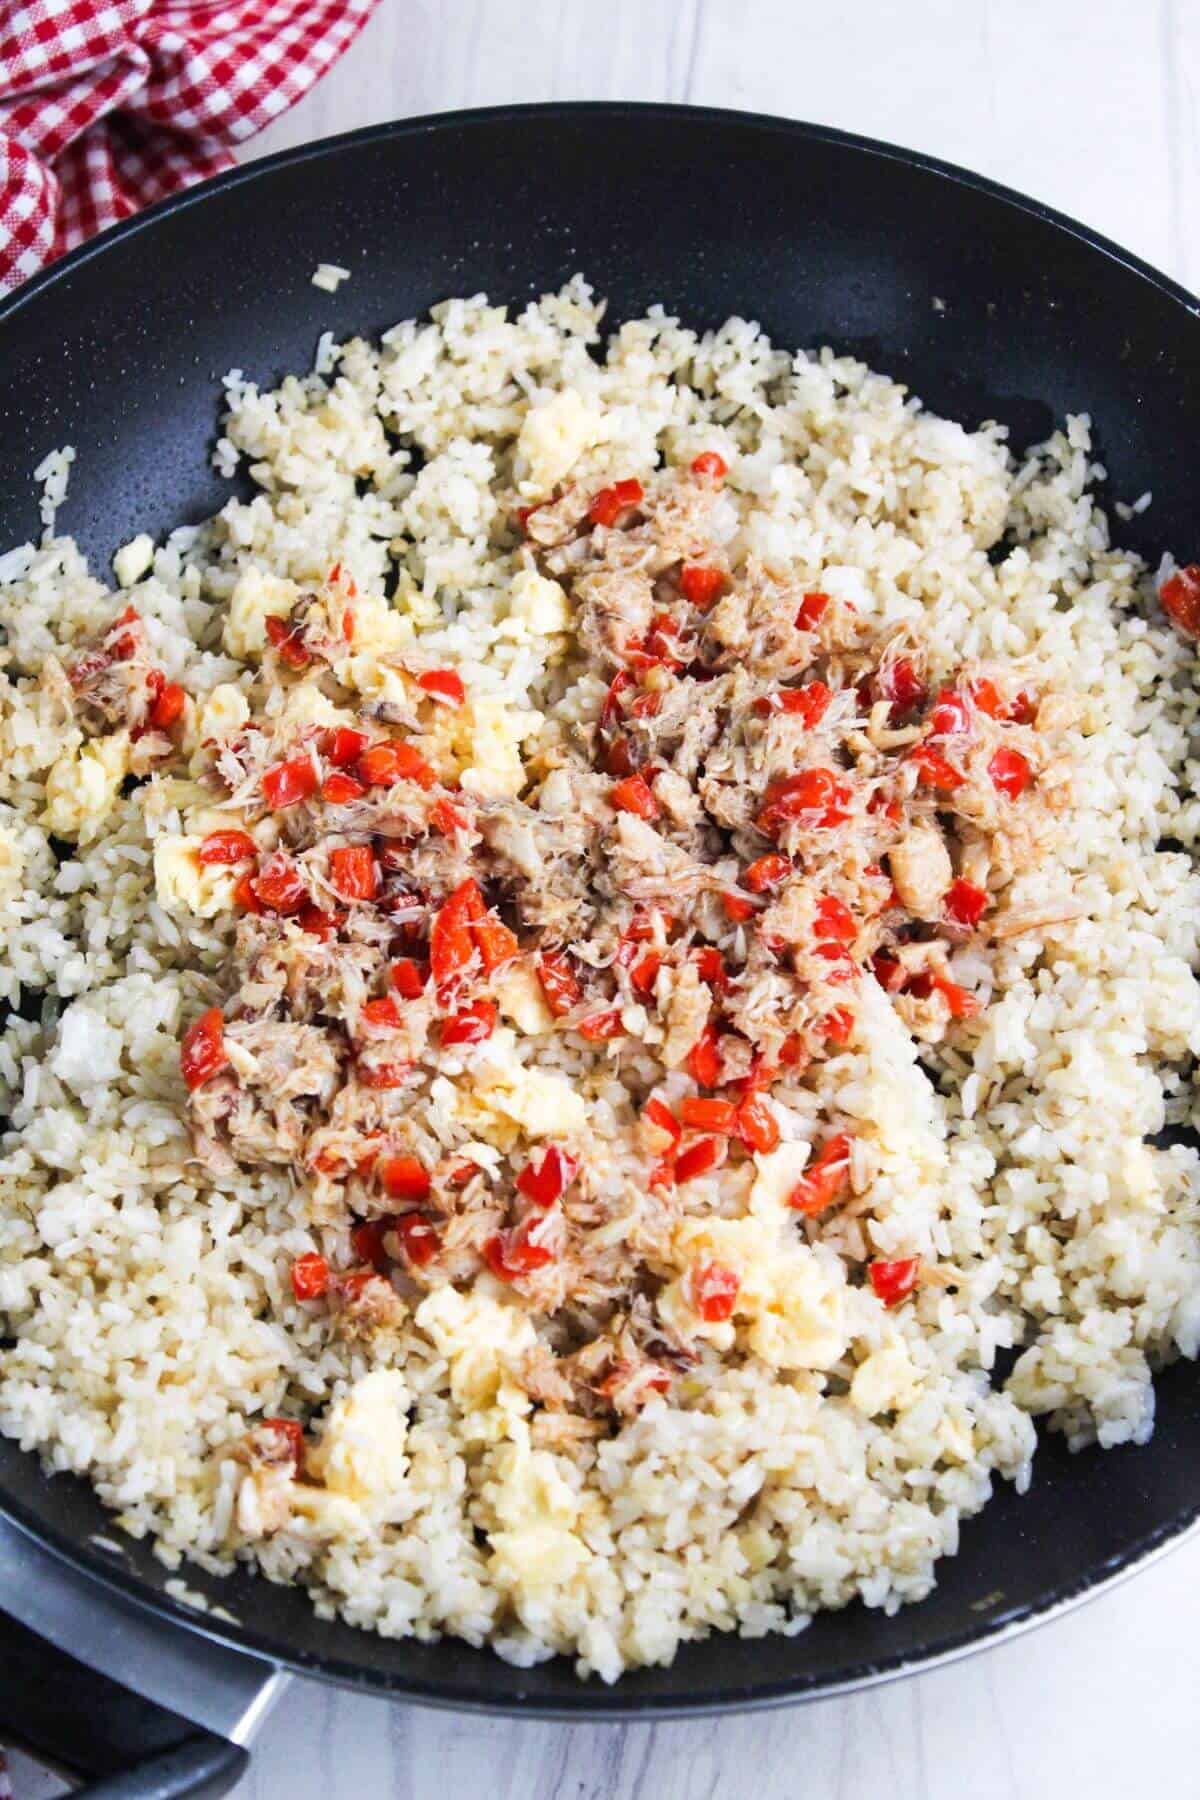 Fried rice with crab meat and peppers in a frying pan.